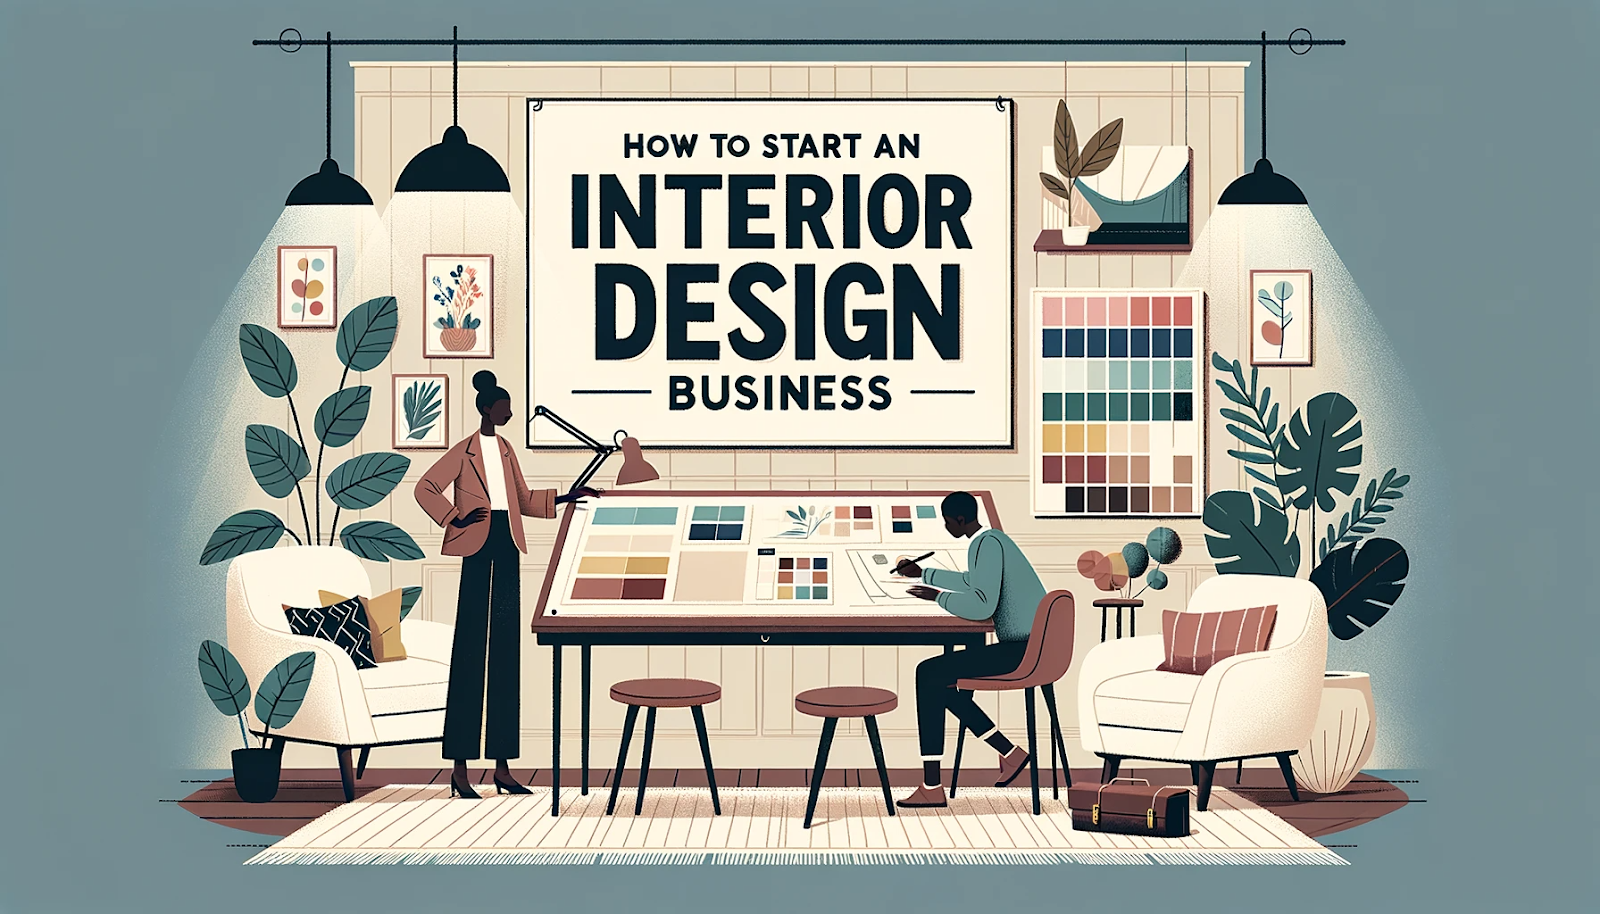 Illustration of a cozy workspace with a large drafting table, color swatches, and mood boards. The words 'How To Start an Interior Design Business' are boldly and stylishly center-aligned above the table. A Black man is sketching a design layout, while a Black woman next to him is choosing fabric samples. The background has soft lighting and indoor plants.